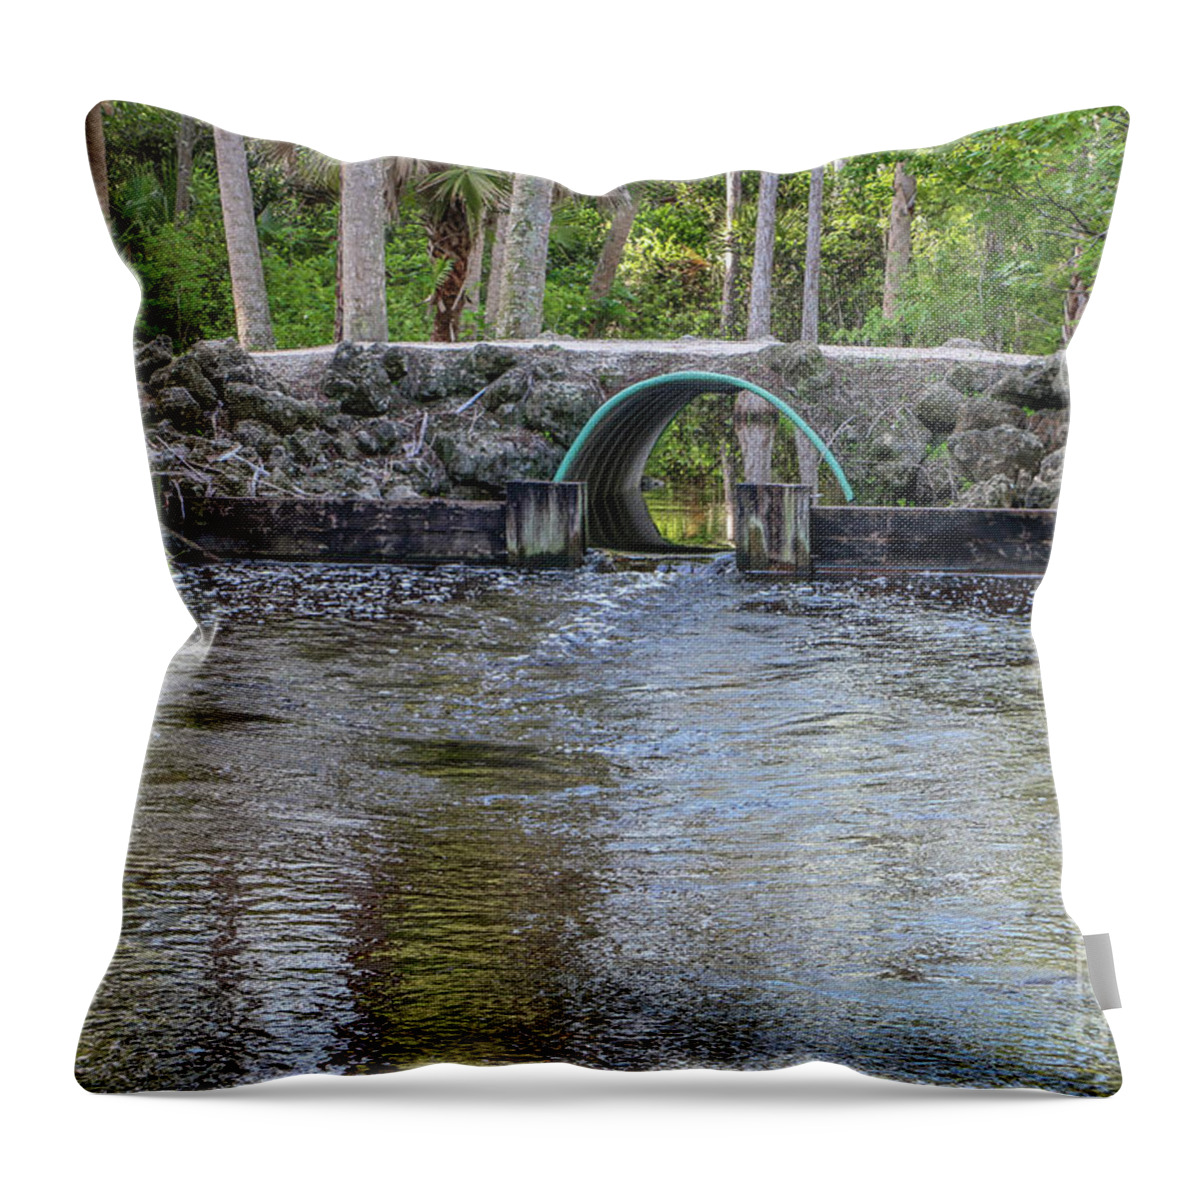 Footbridge Throw Pillow featuring the photograph Rocky Footbridge by Tom Claud